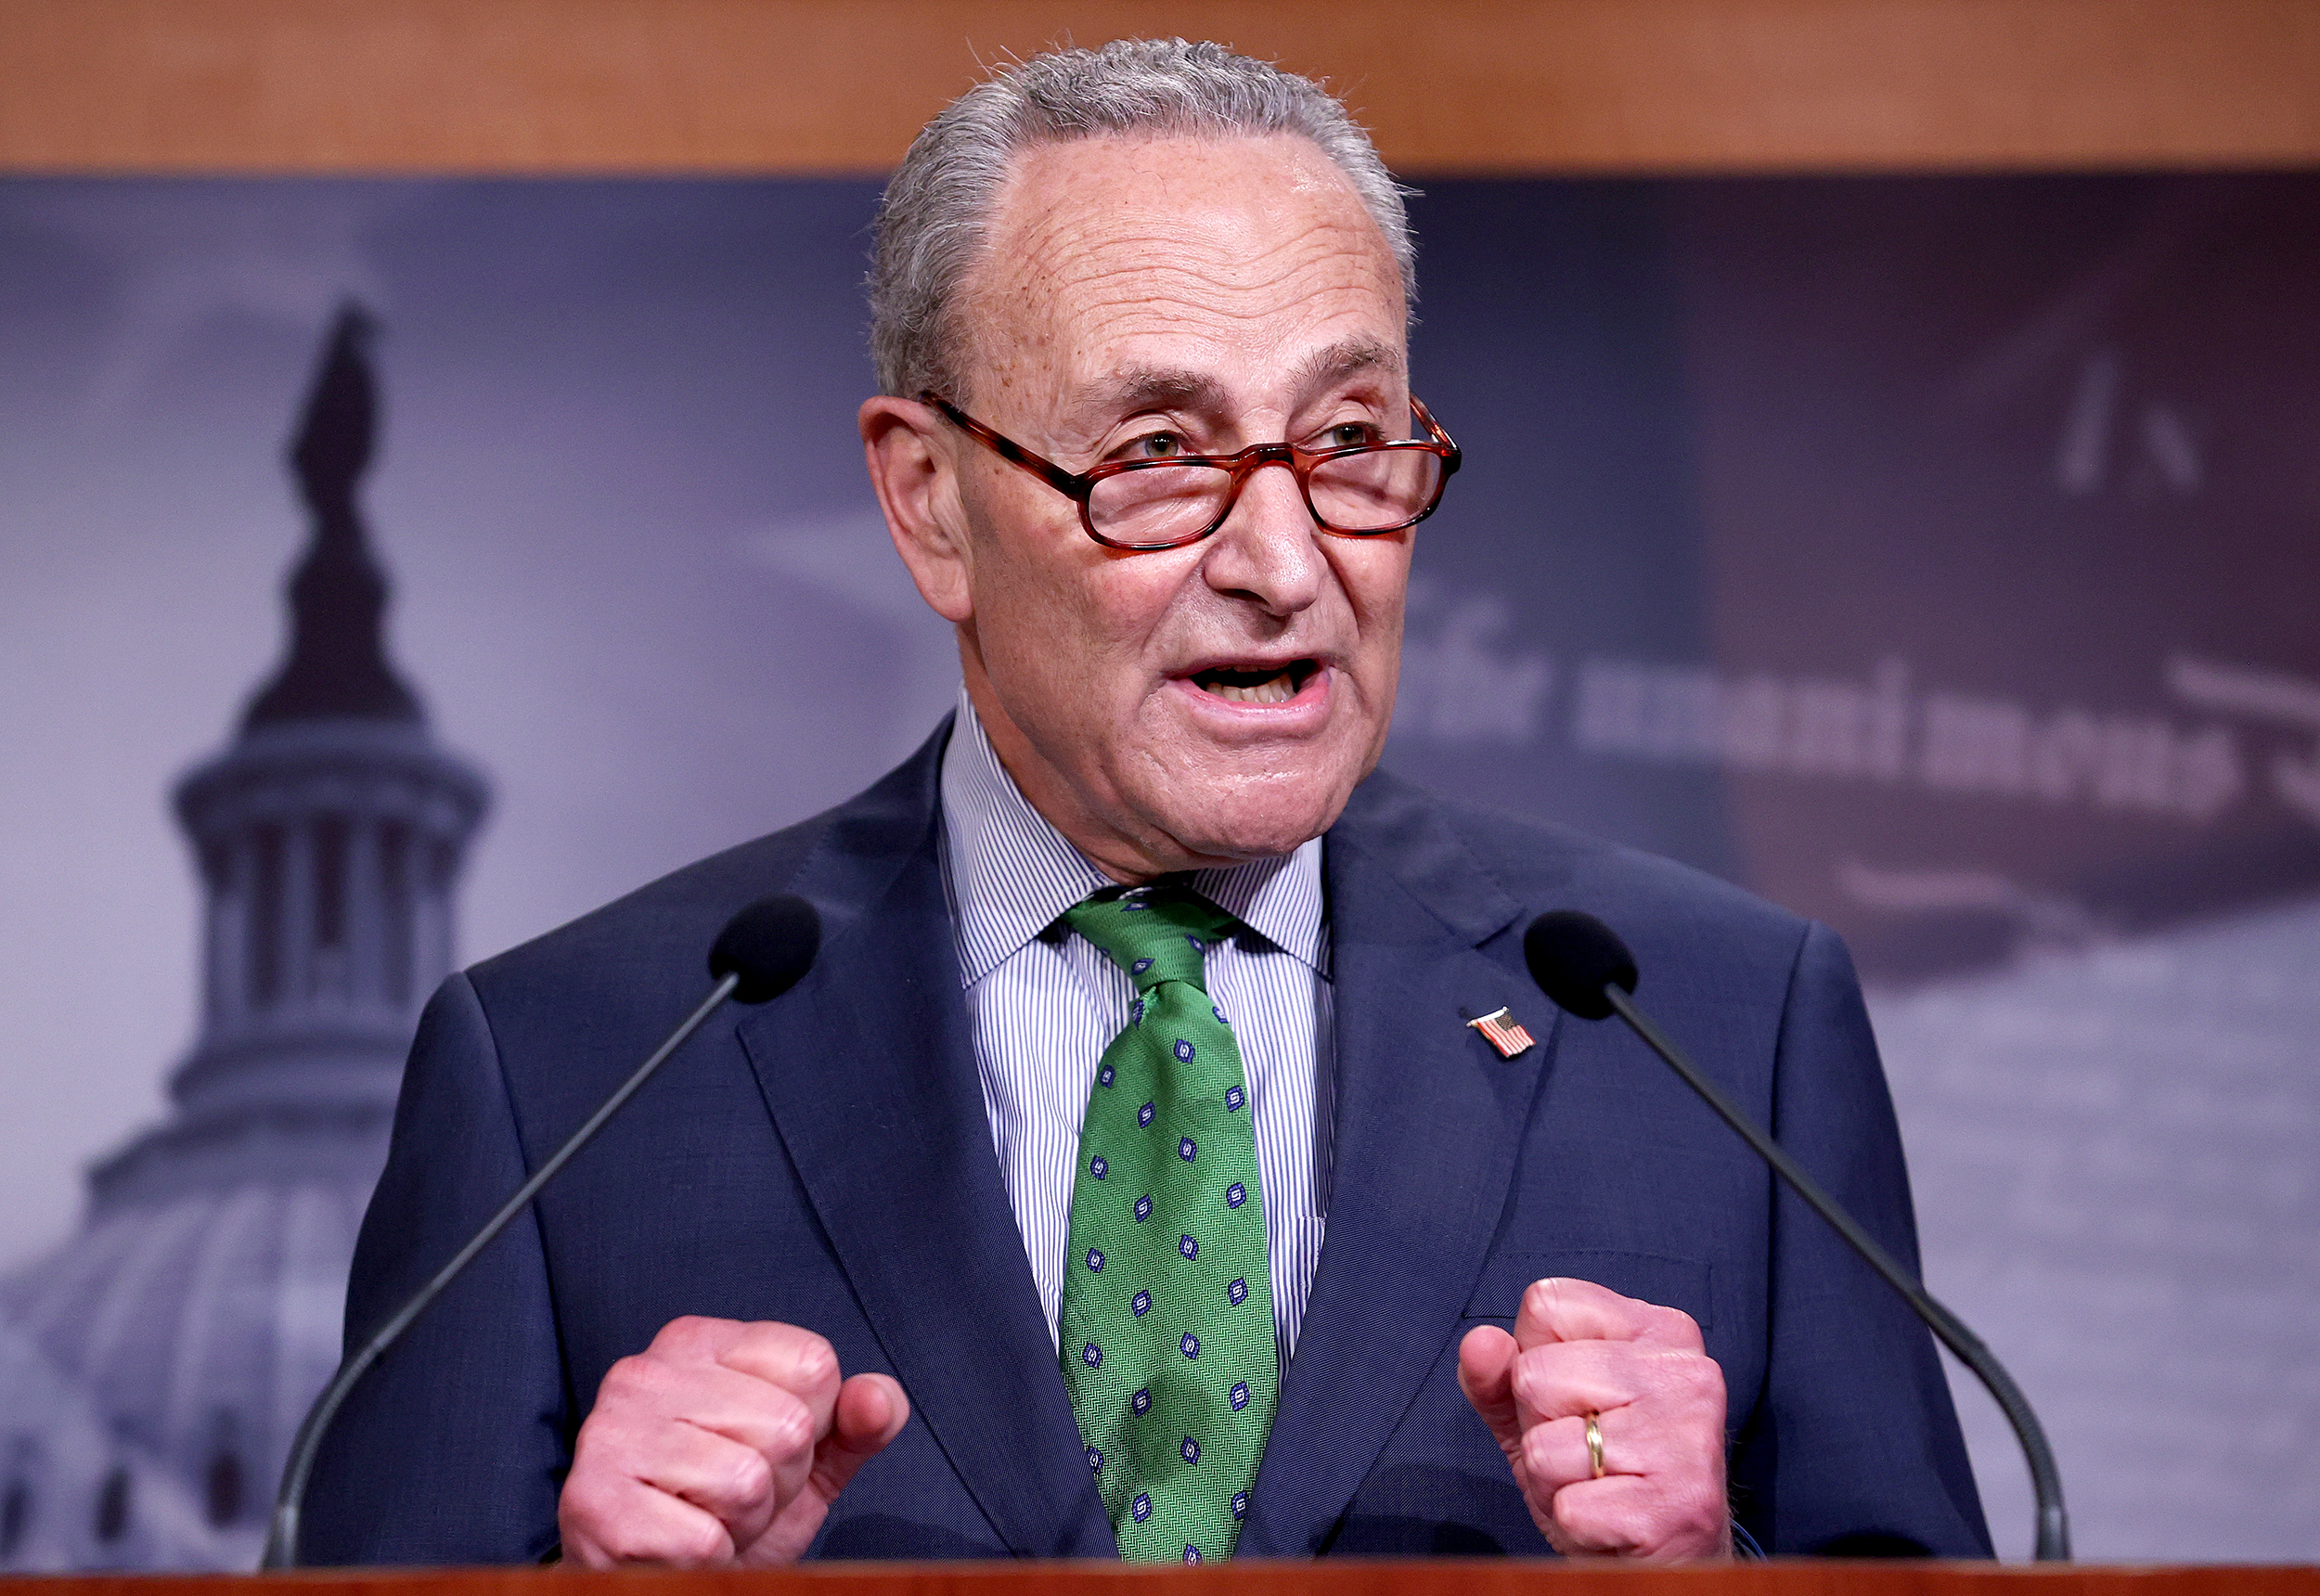 Chuck Schumer asks Biden to send ‘robust allotment’ of vaccine doses to India